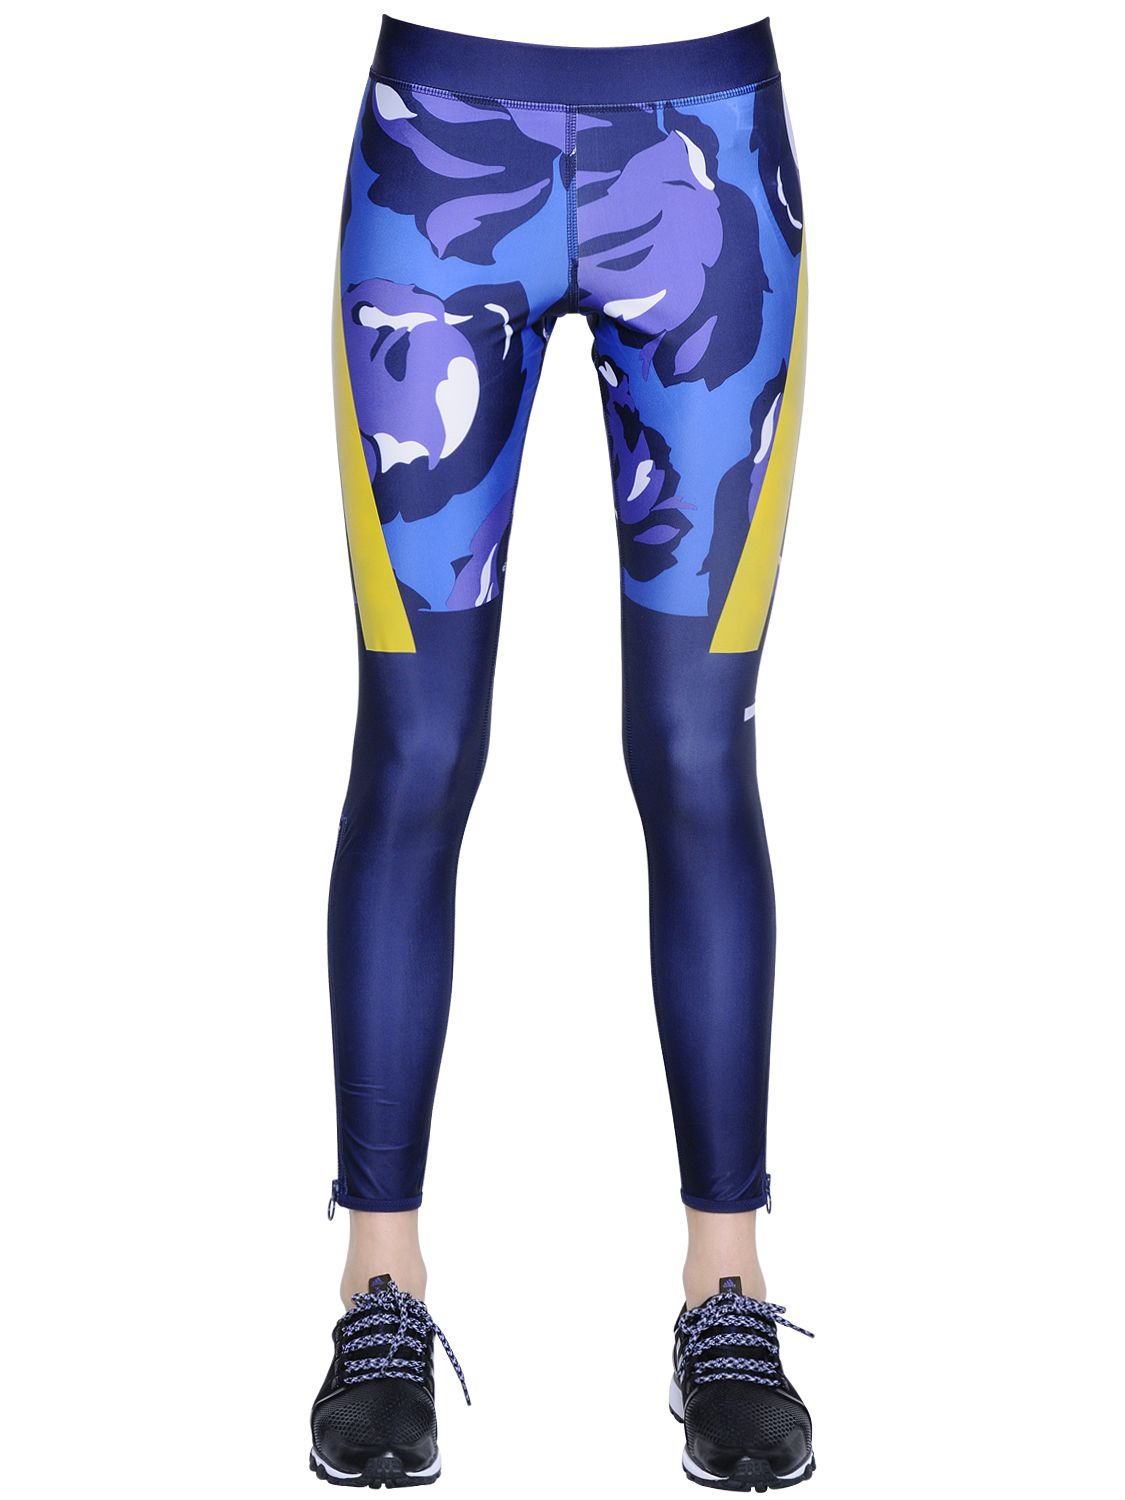 Electric Blue Fabric With Fading Stripes & Gold Allover Print Yoga Leggings,  Festival Pants. Thick, Quality 95% Cotton With Lycra.unisex. 